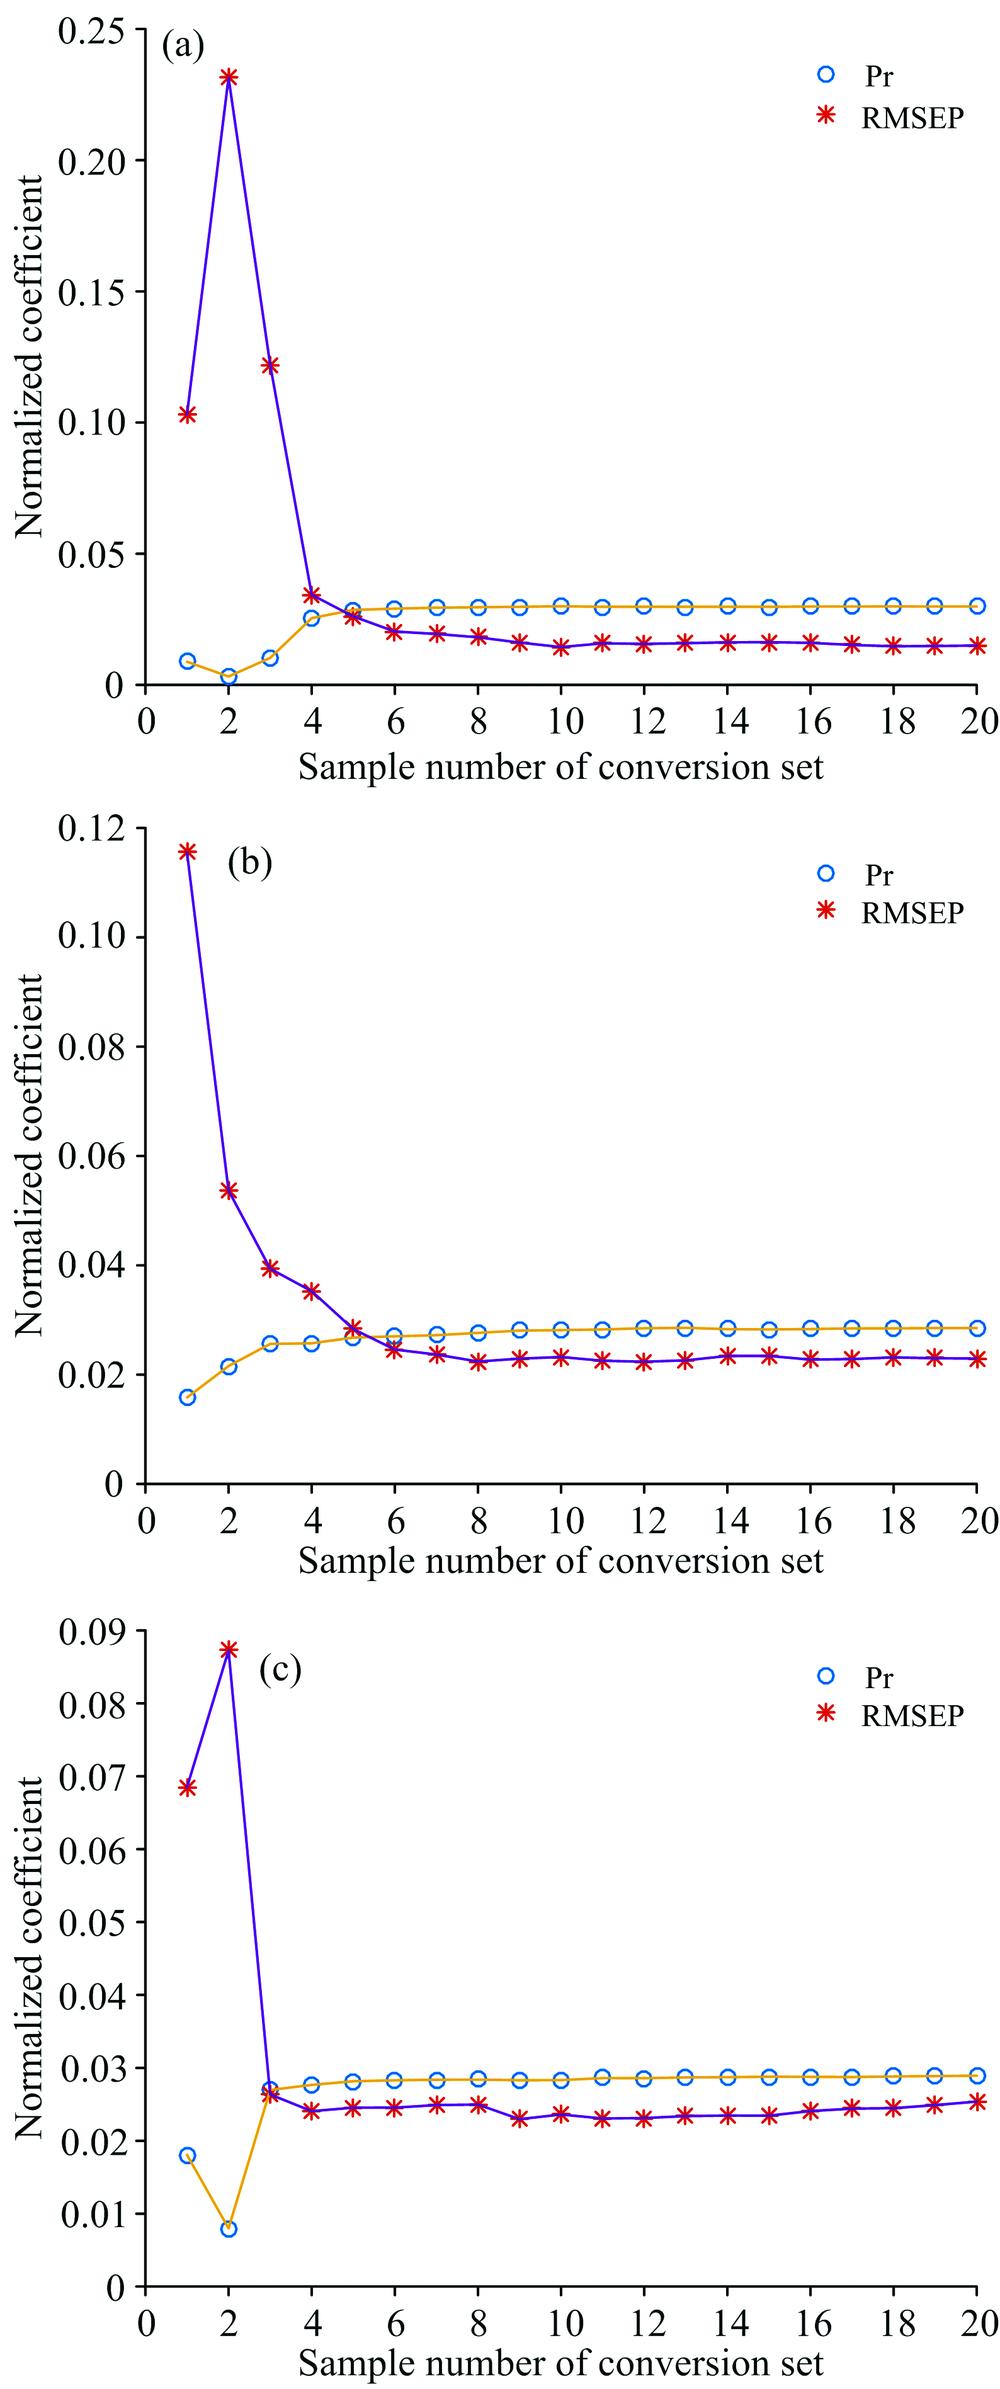 The relation between the normalized parameters (RMSEP and PR) and the number of conversion sets(a): Cefradine; (b): Cephalexin; (c): Moisture content